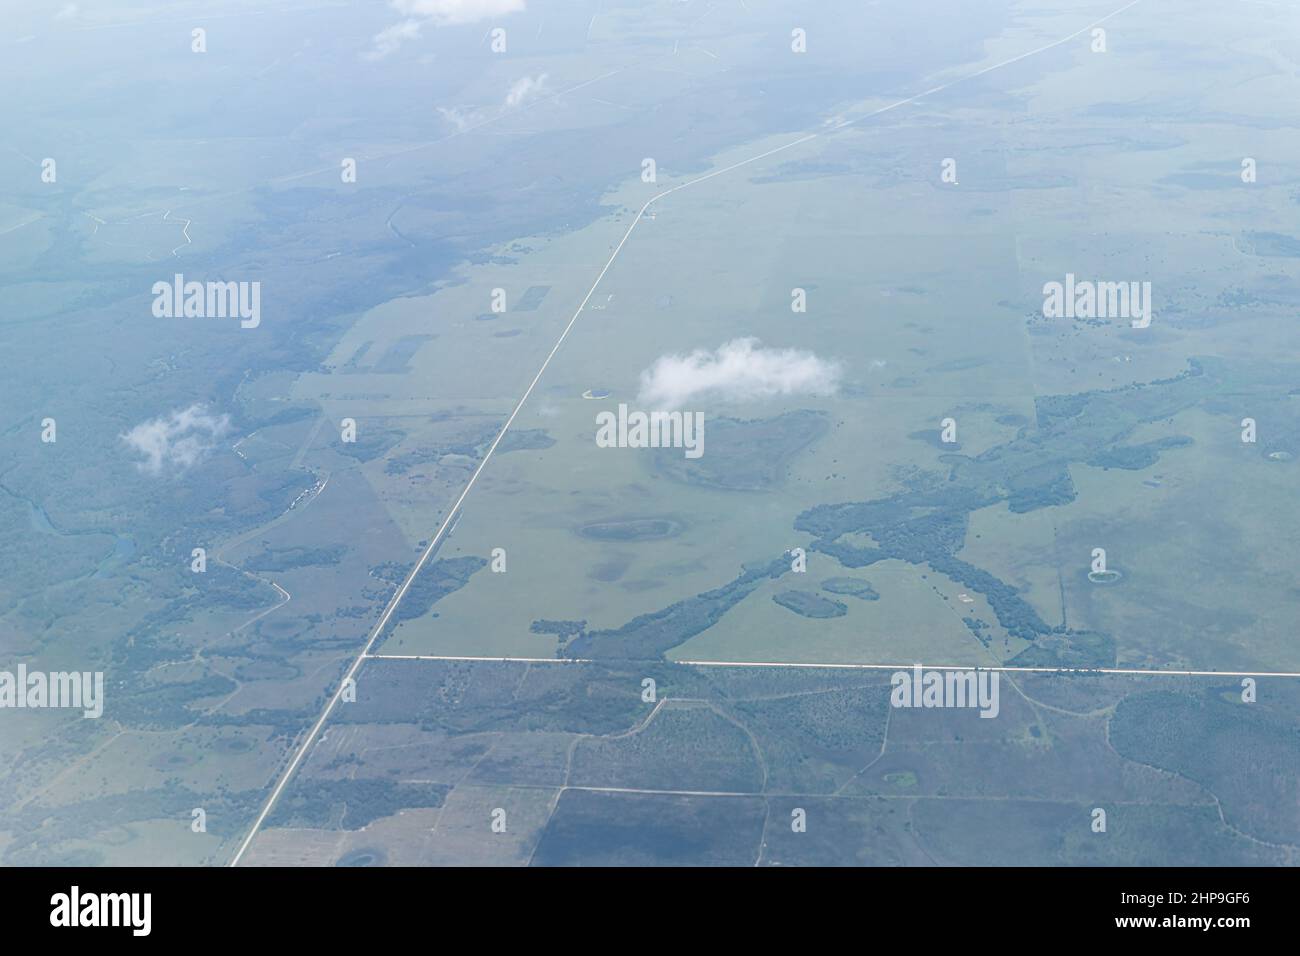 High angle aerial view of southwest Florida near Ft Myers countryside landscape with farm fields and clouds Saharan dust plume air layer causing haze Stock Photo